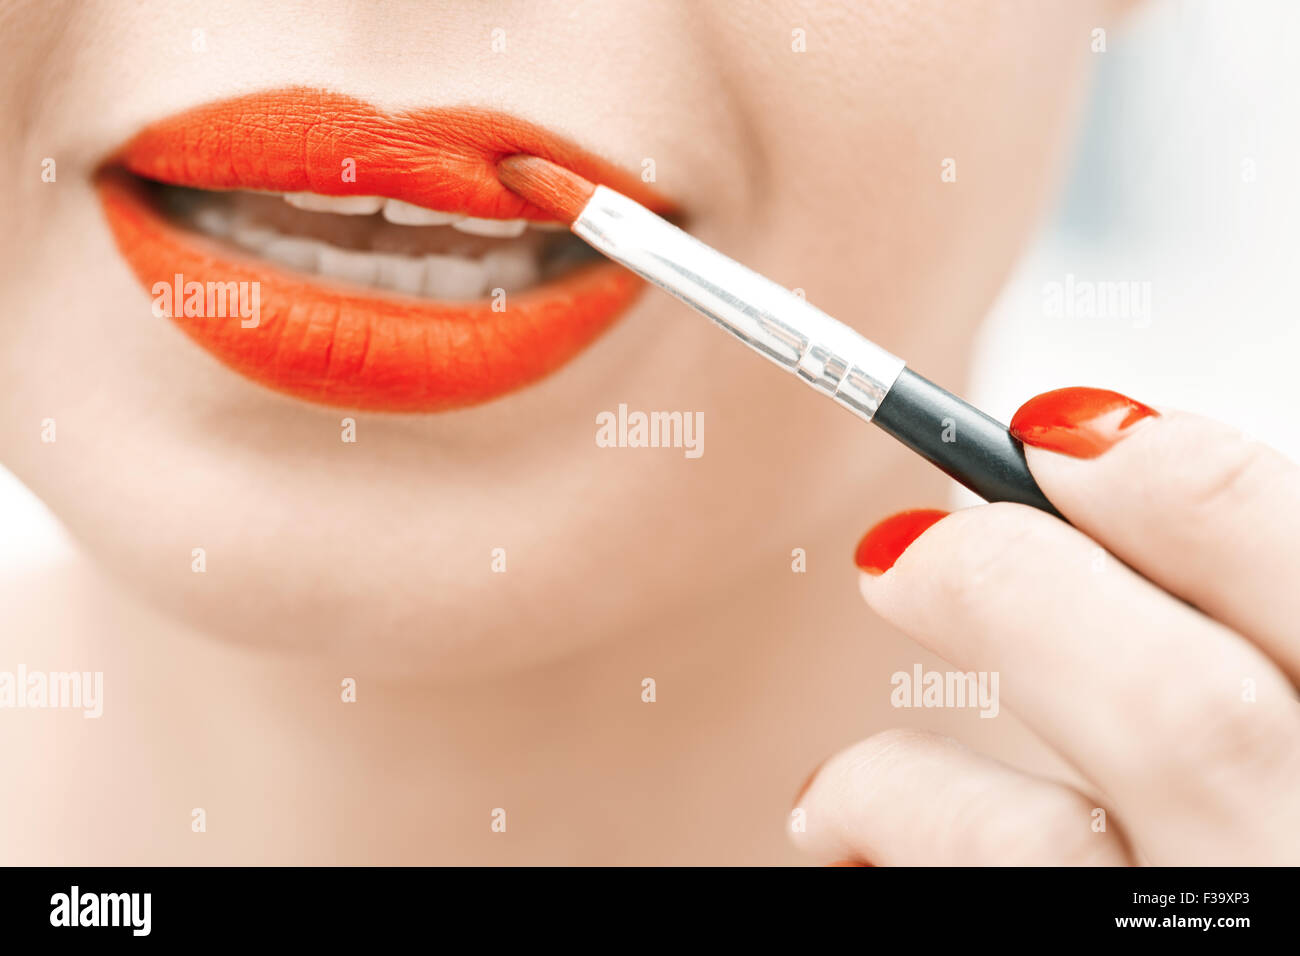 Woman applying red lipstick. Close-up view on face Stock Photo